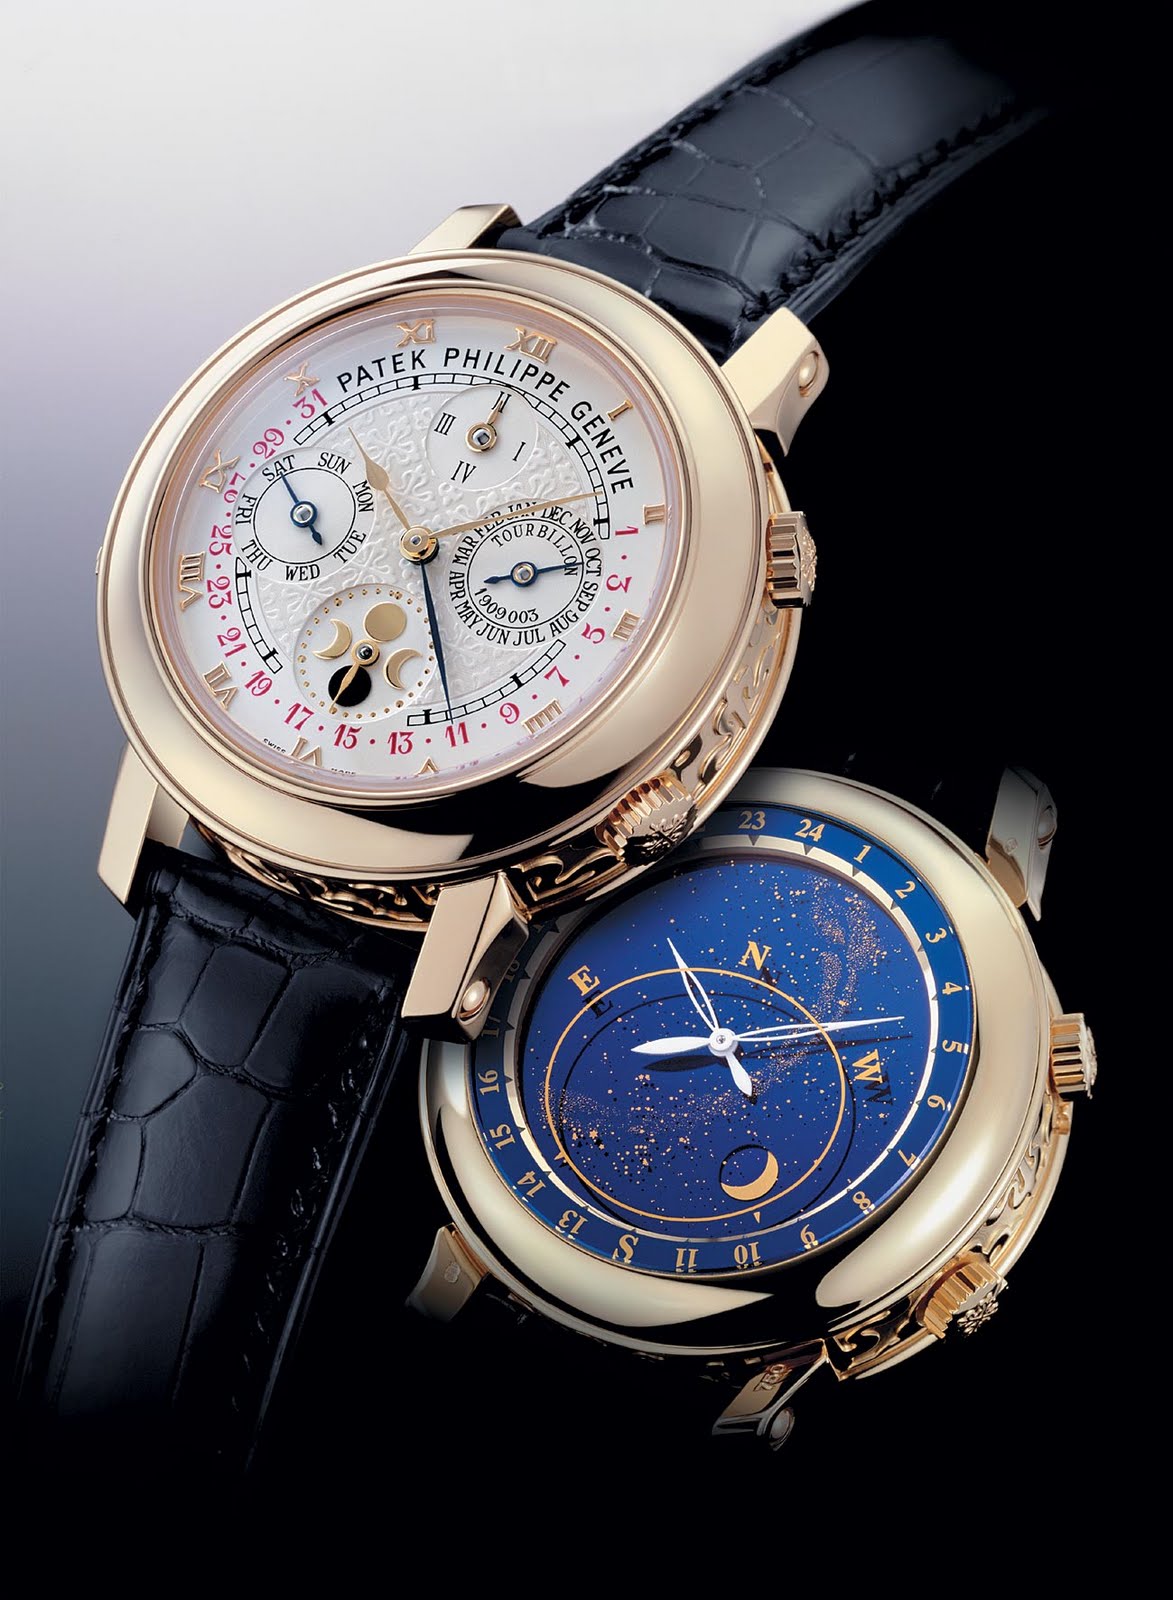 Patek Philippe Sky Moon Tourbillon Ref. 5002 MOST EXPENSIVE WATCH IN THE WORLD